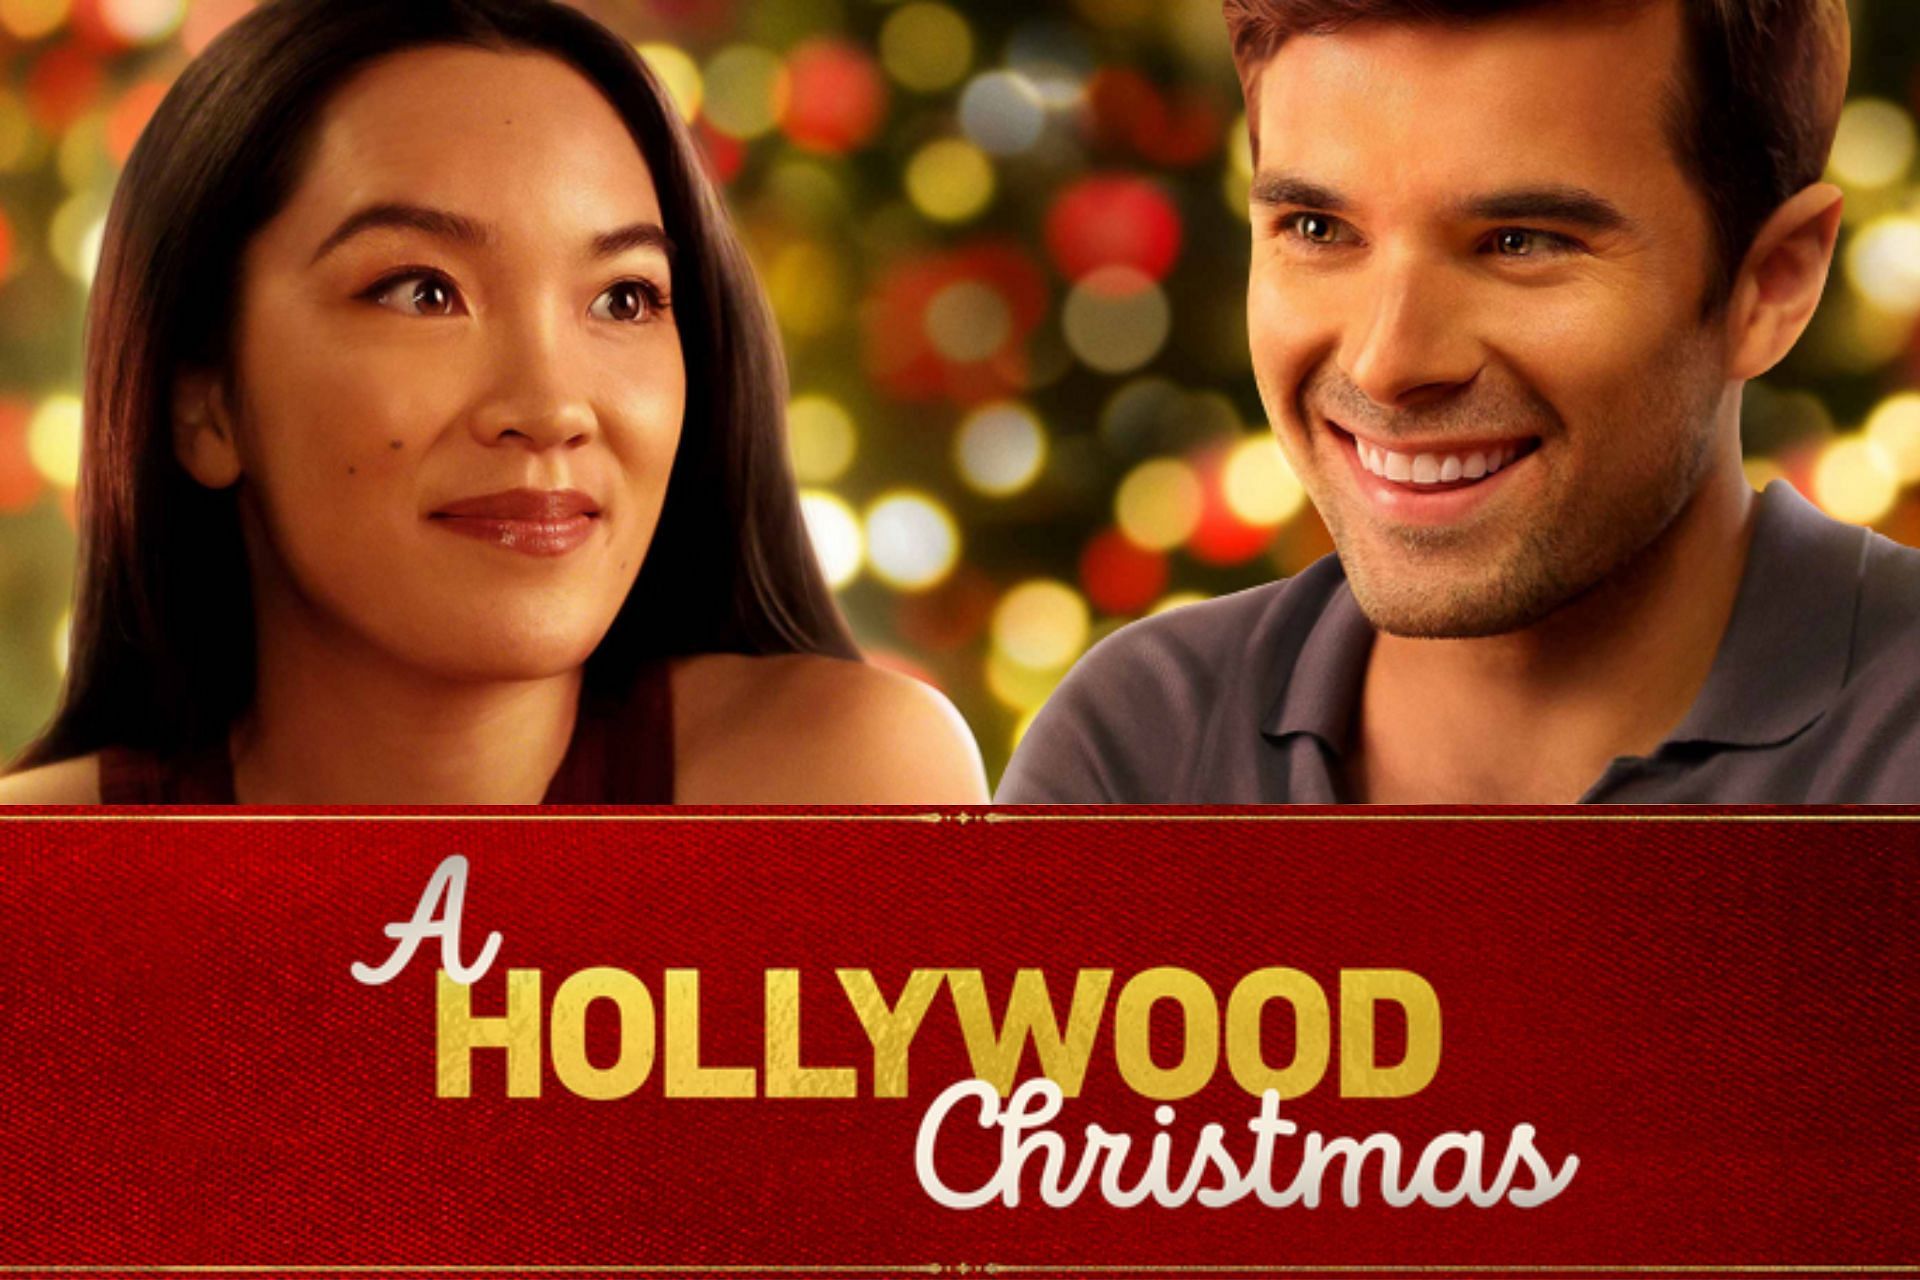 hollywood christmas movie review